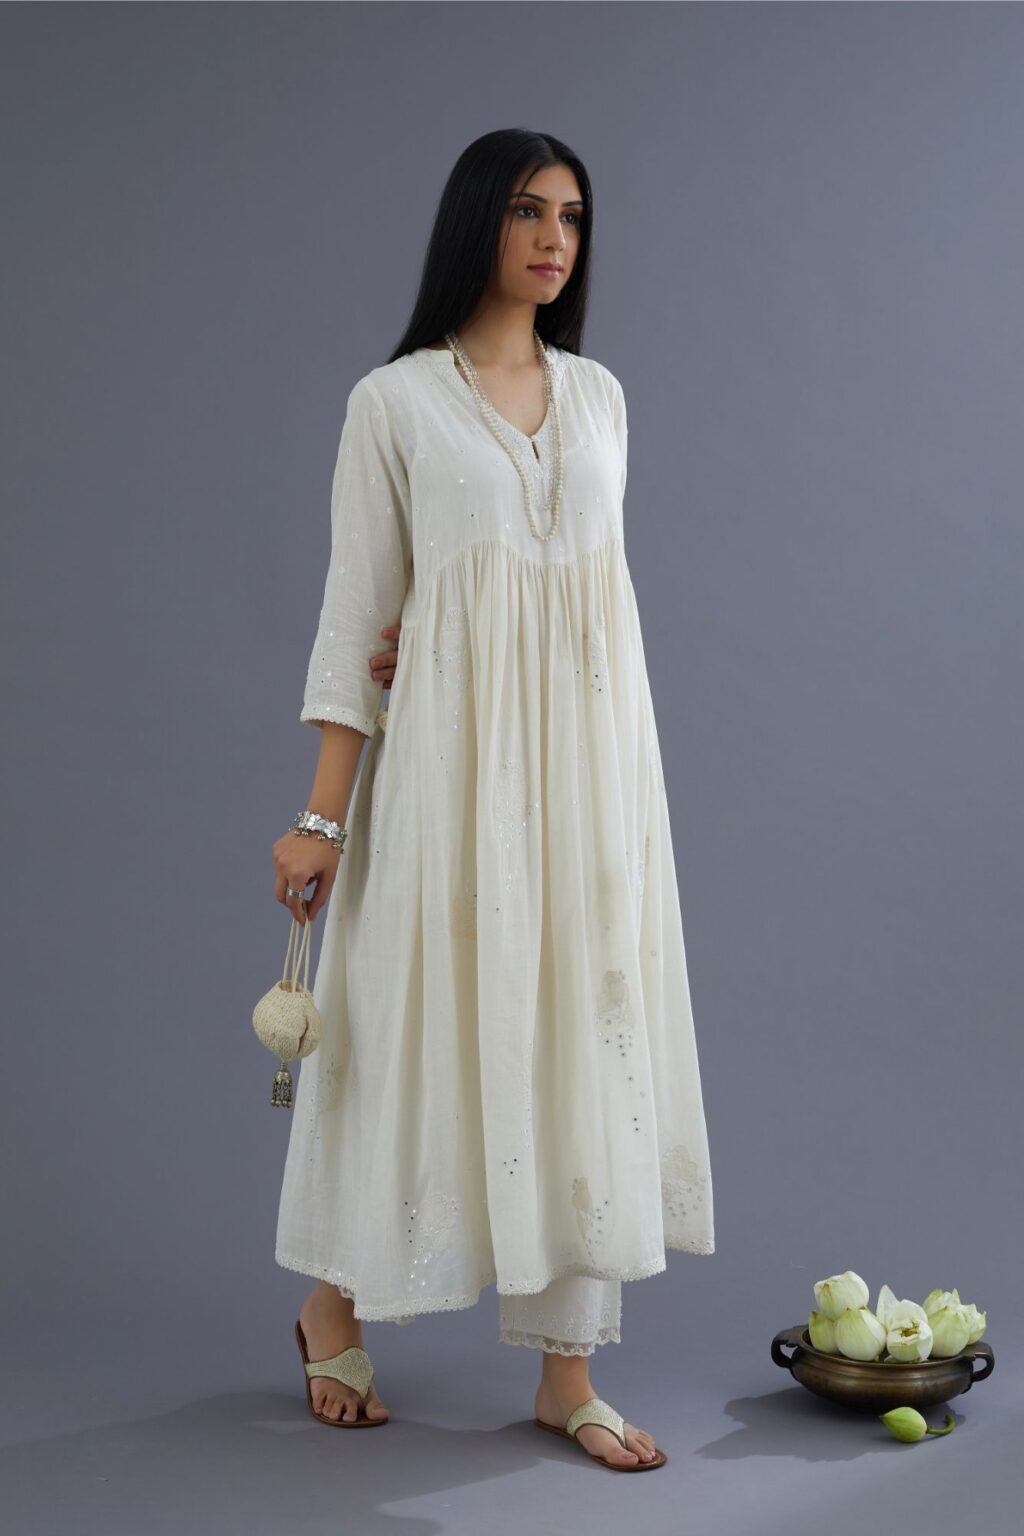 Handspun Hand-Woven cotton kurta set with wavy empire waistline and gathers, highlighted with applique flower embroidery and mirror hand work